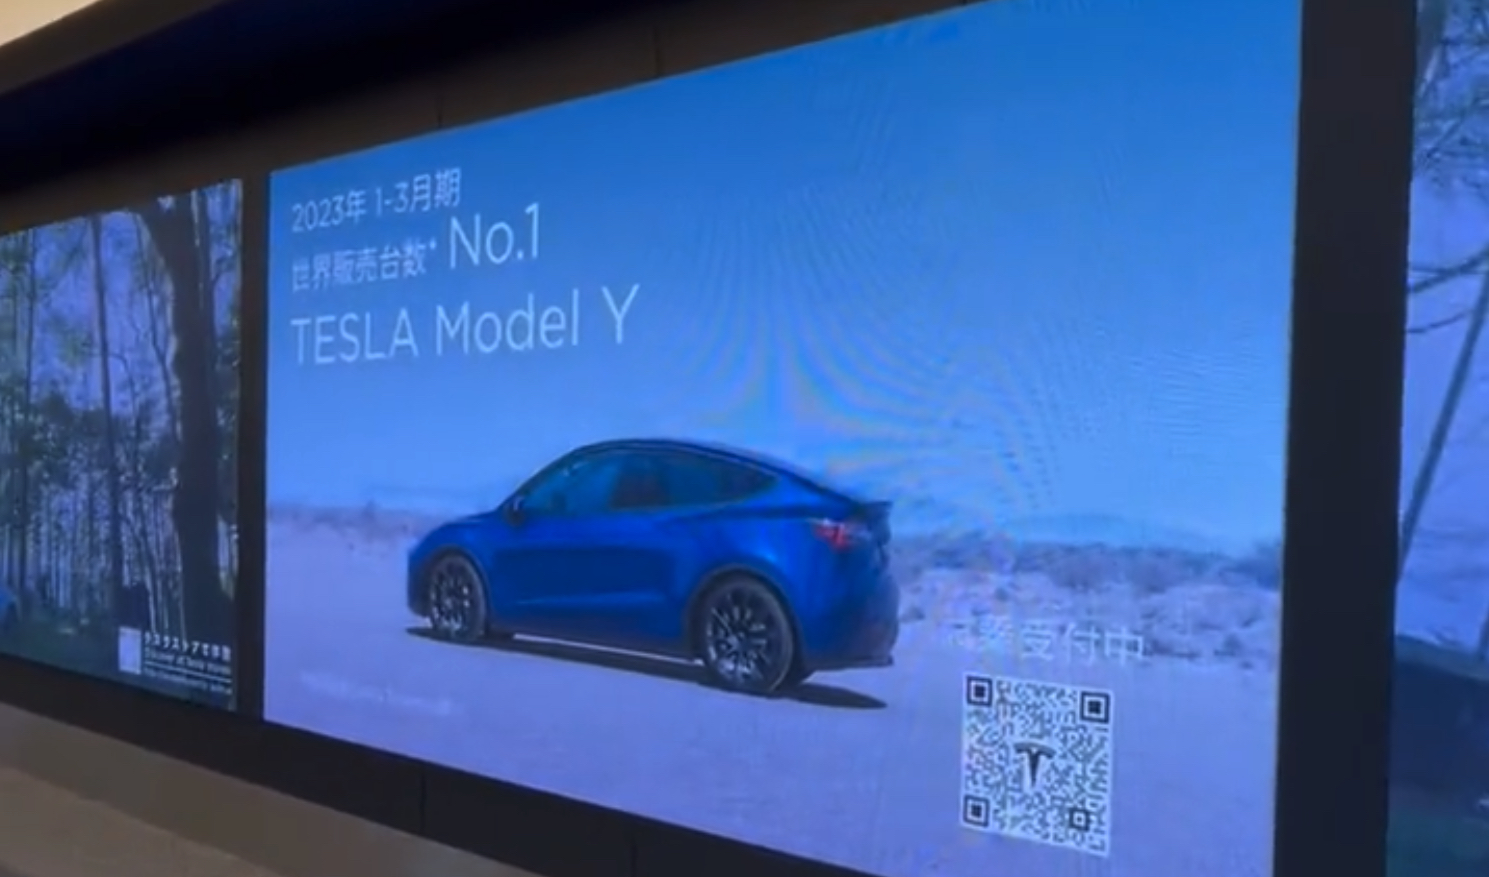 Tesla commercials noticed in an airport in Japan